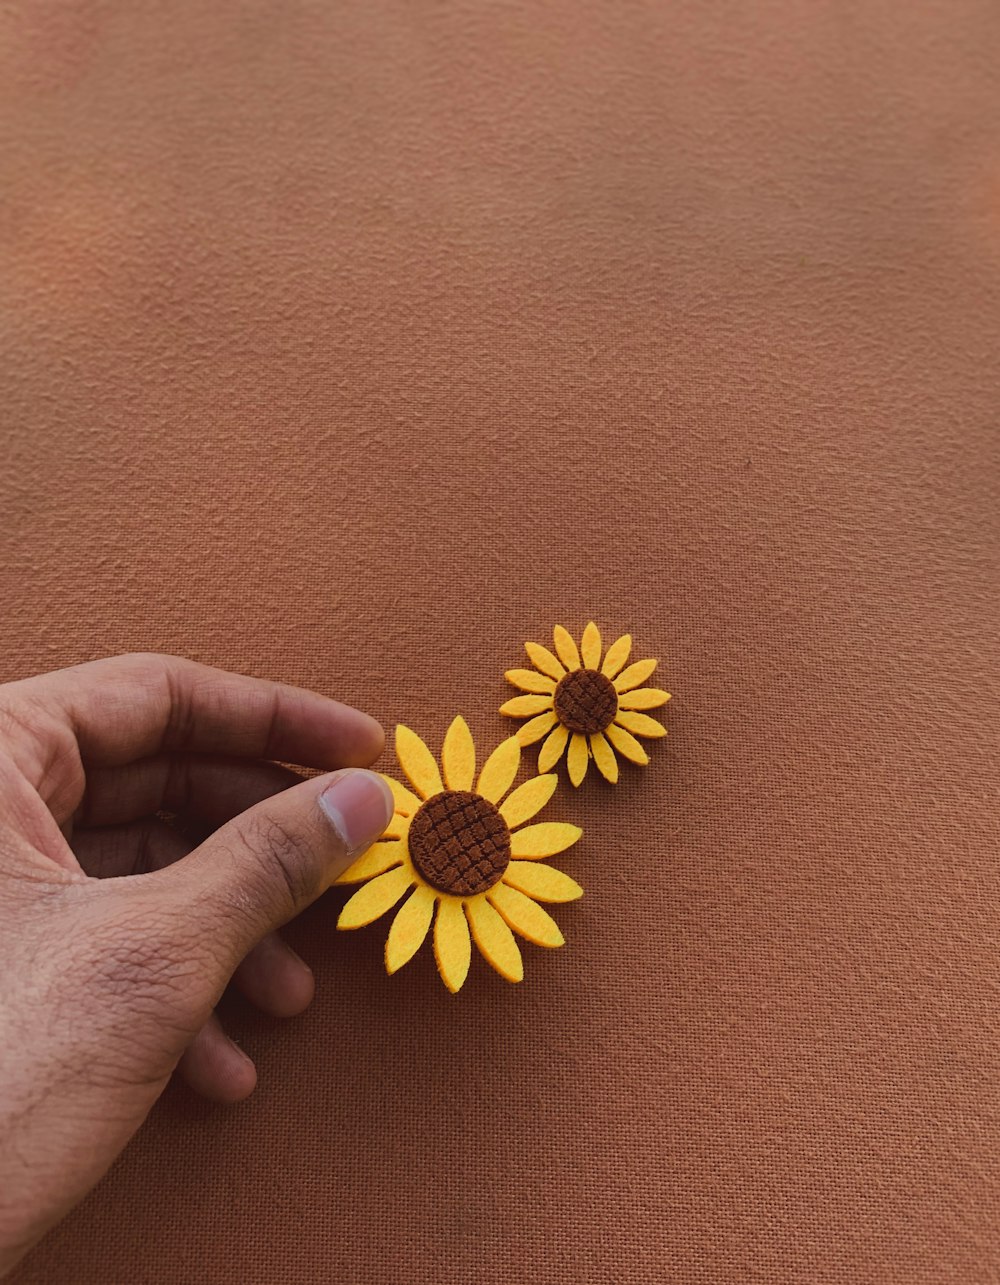 Person holding sunflower toys on a brown background